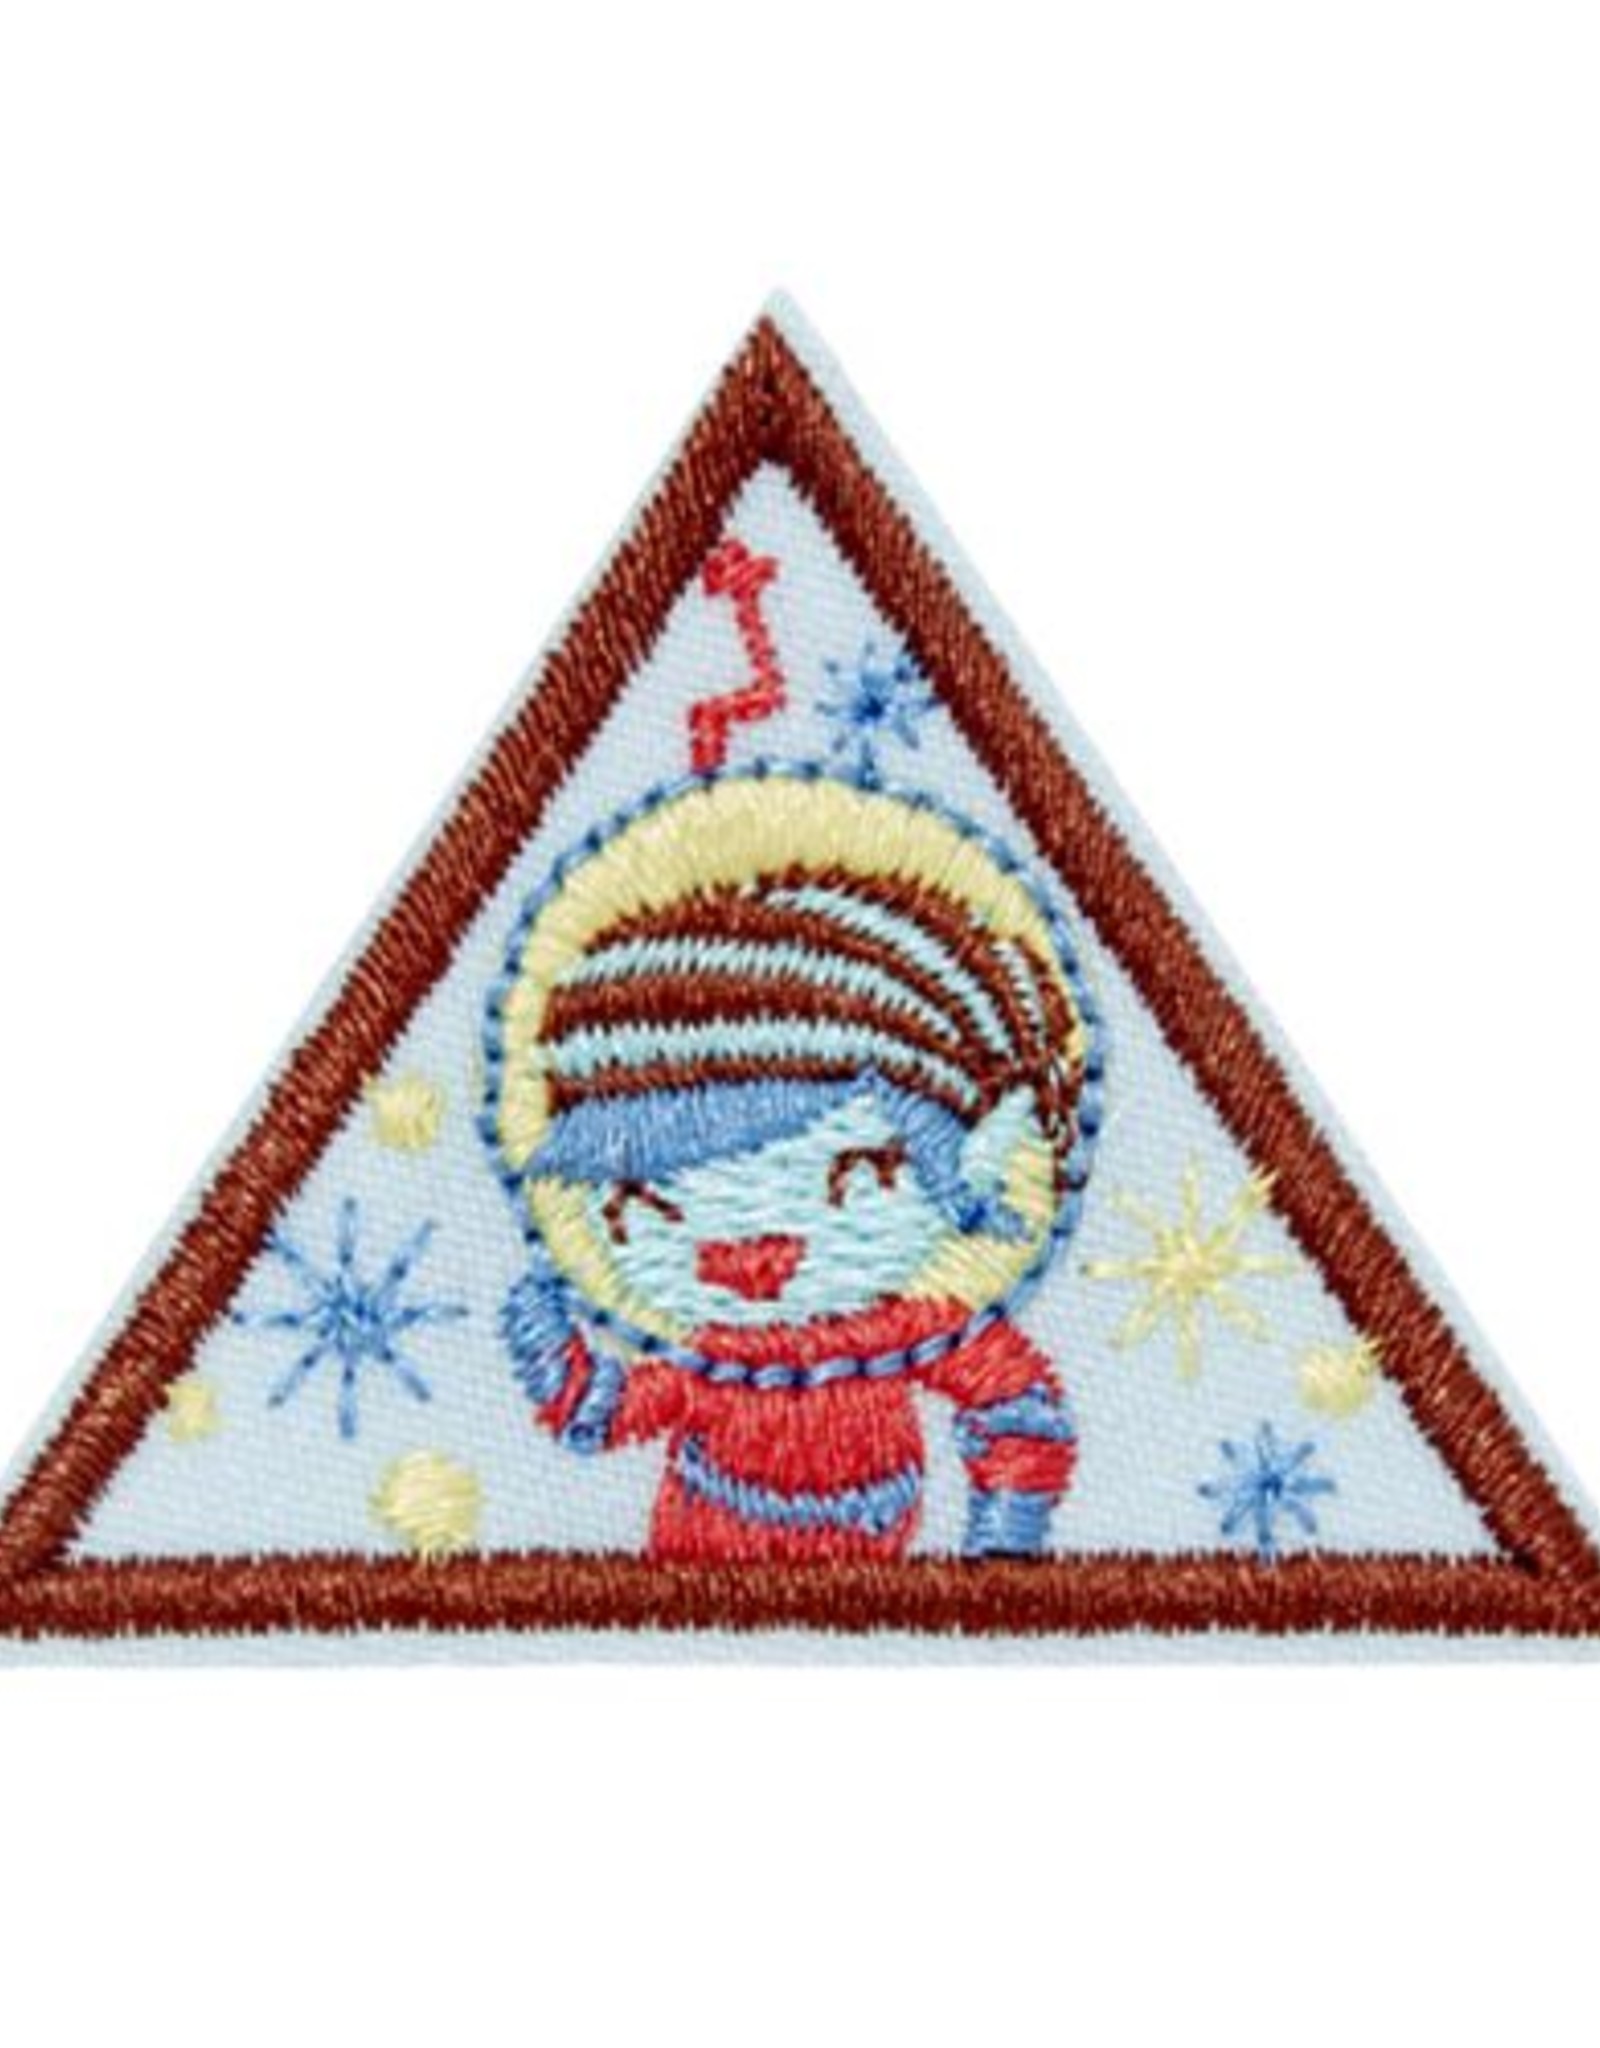 GIRL SCOUTS OF THE USA Brownie Space Science Adventurer Badge